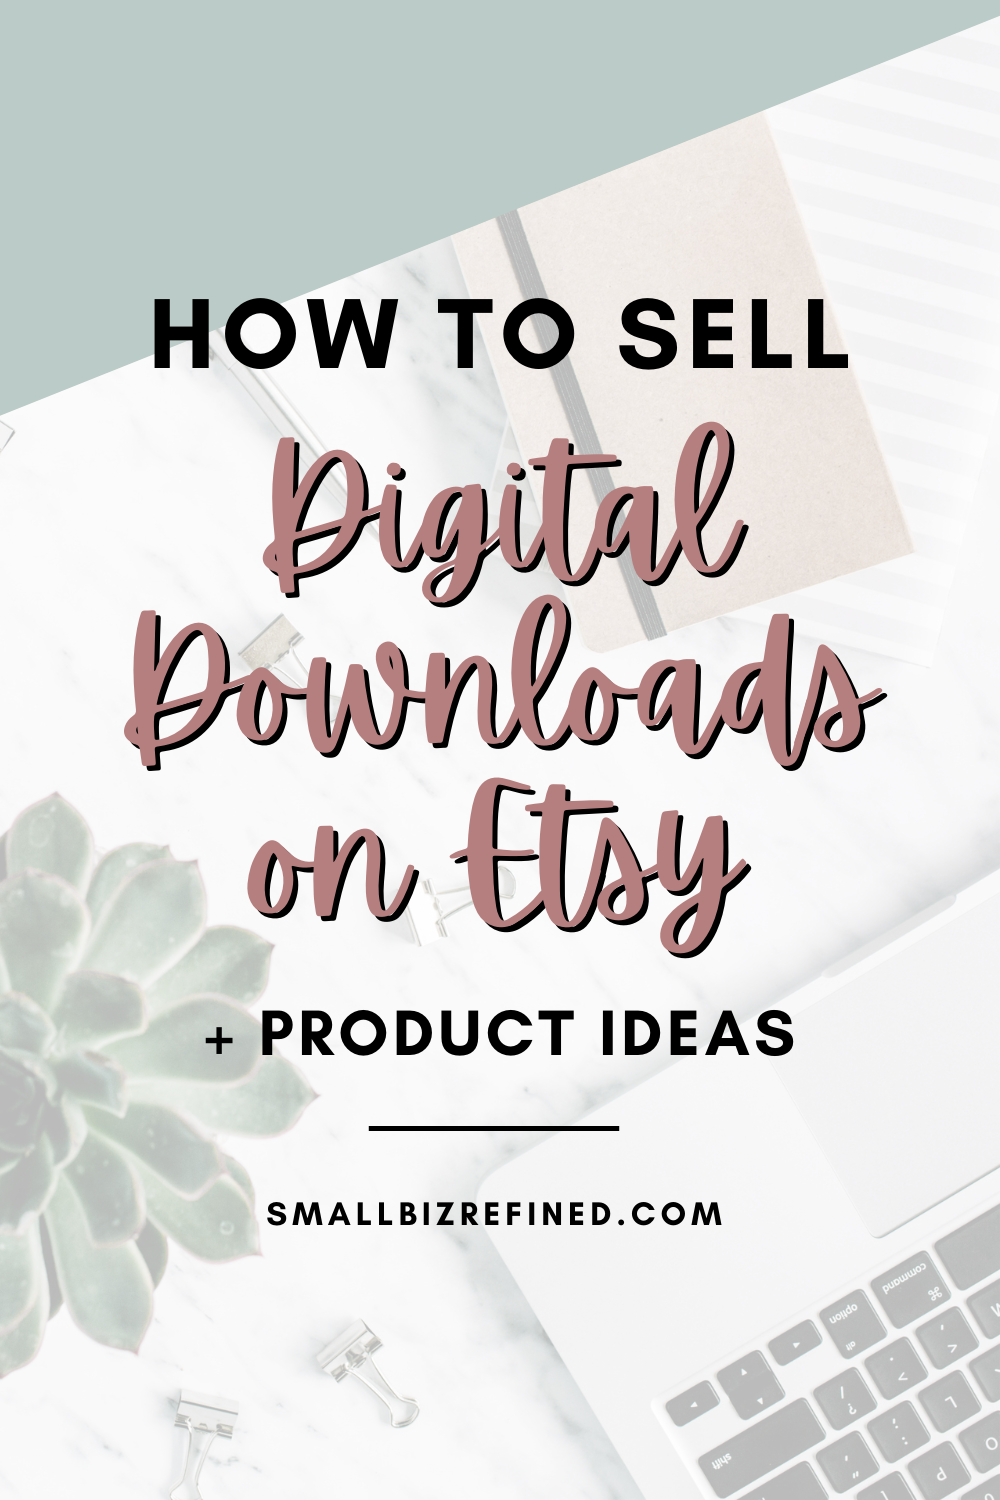 learn-how-to-sell-on-etsy-for-a-profit-printify-things-to-sell